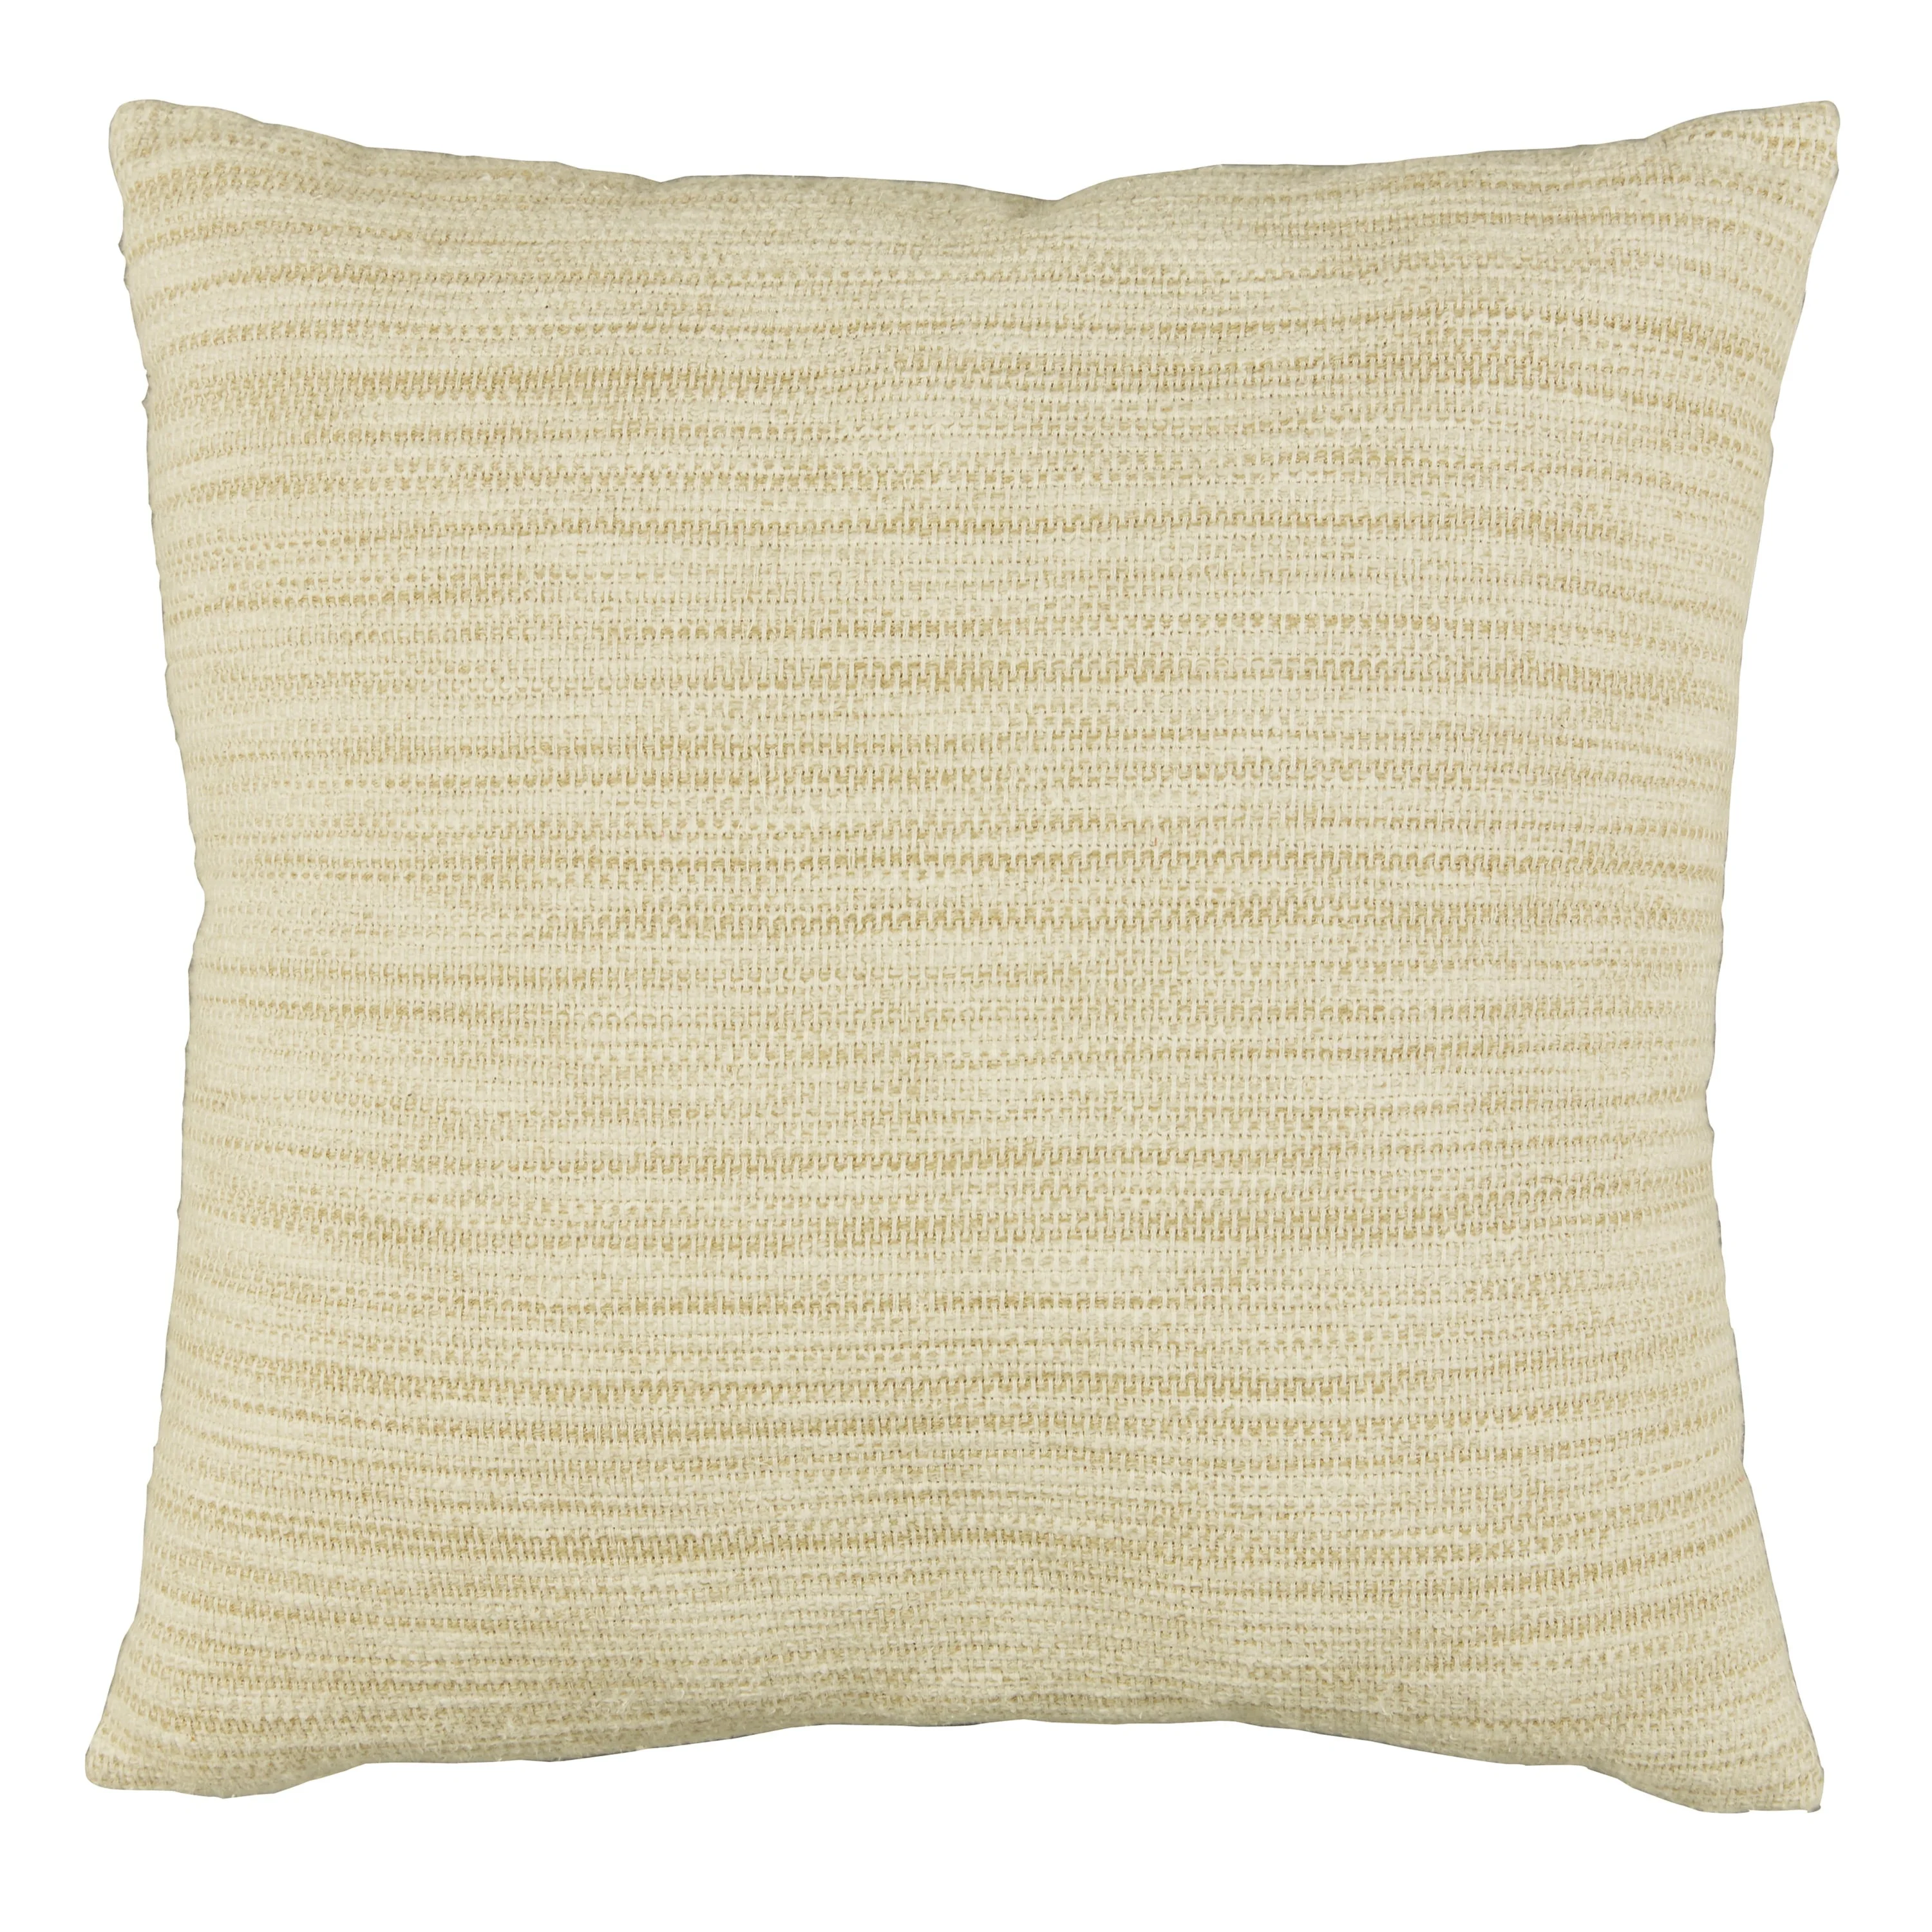 Signature Design by Ashley Decorative Pillows and Blankets Caygan Pillow ( Set of 4) A1000916